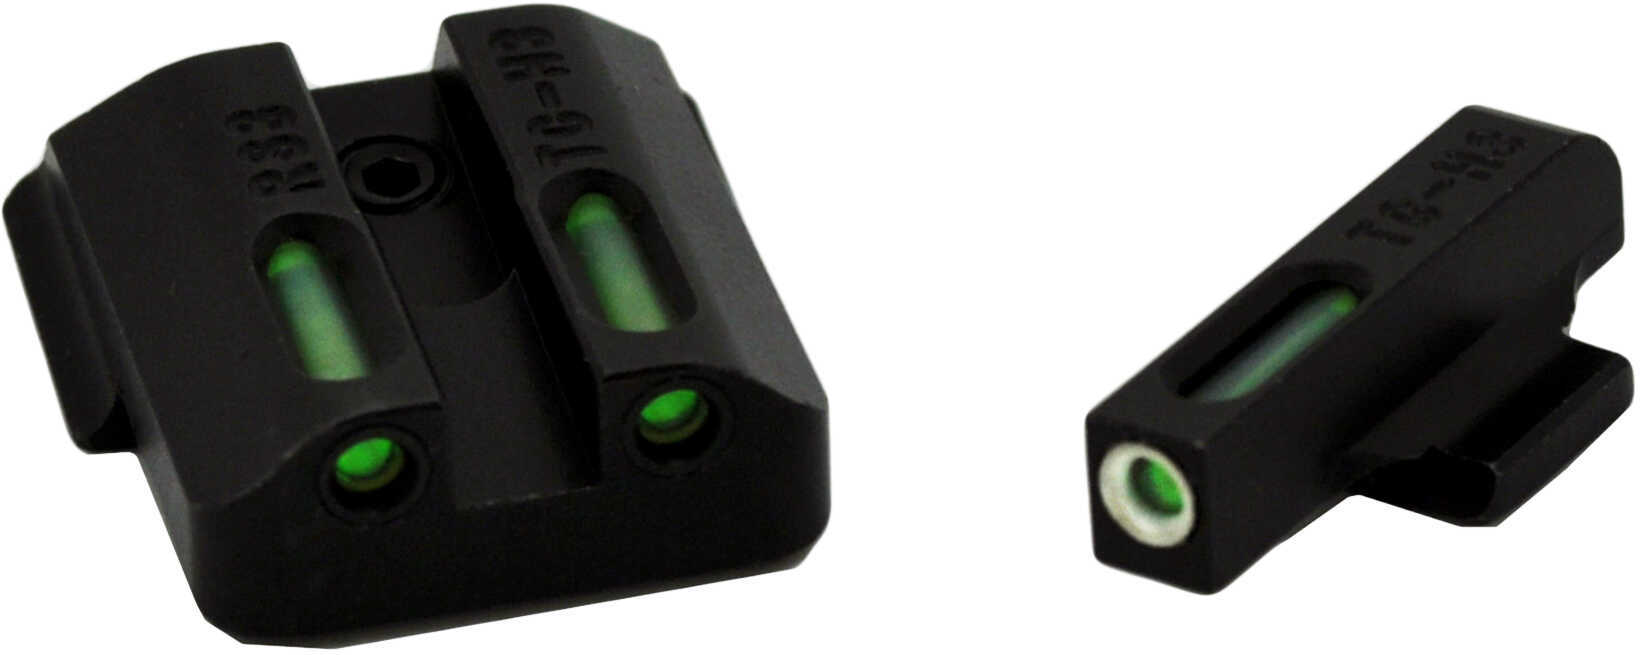 Truglo TFX Sight Set For Ruger American Pistols Front/Rear Green Fortress Finish Md: TG13RS3A